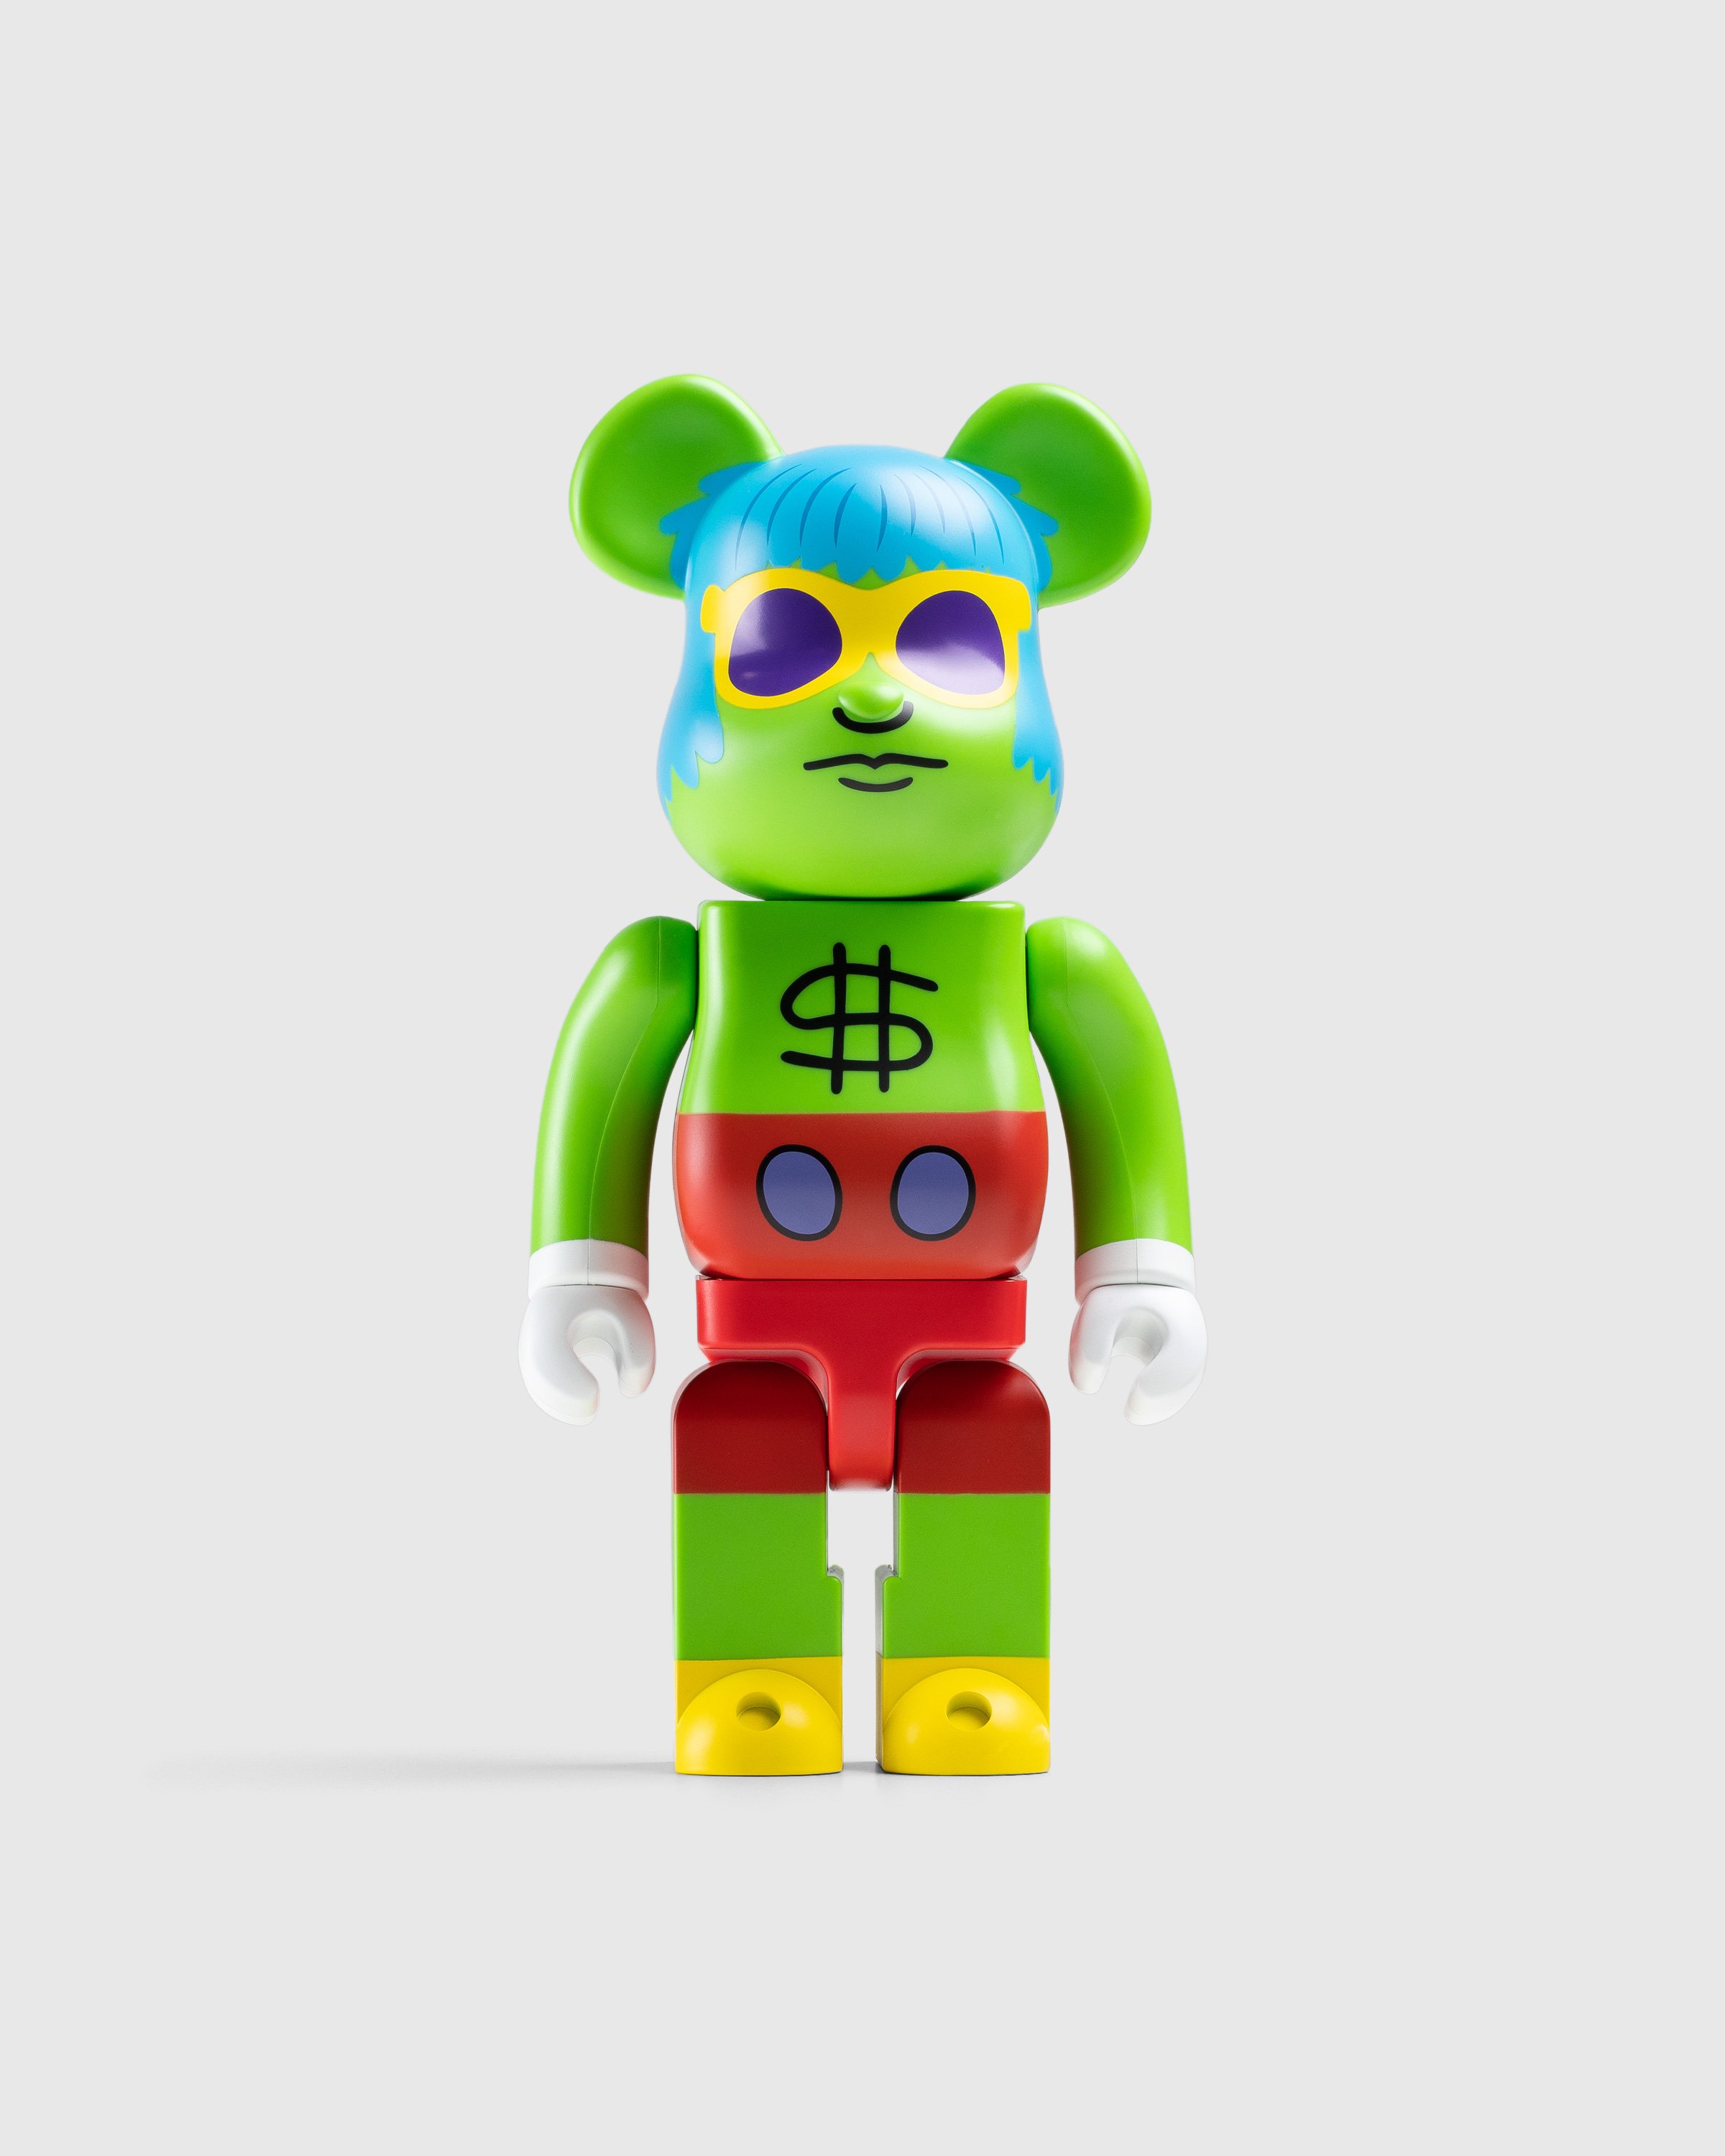 Medicom - Be@rbrick Andy Mouse 400% Green - Lifestyle - Multi - Image 1